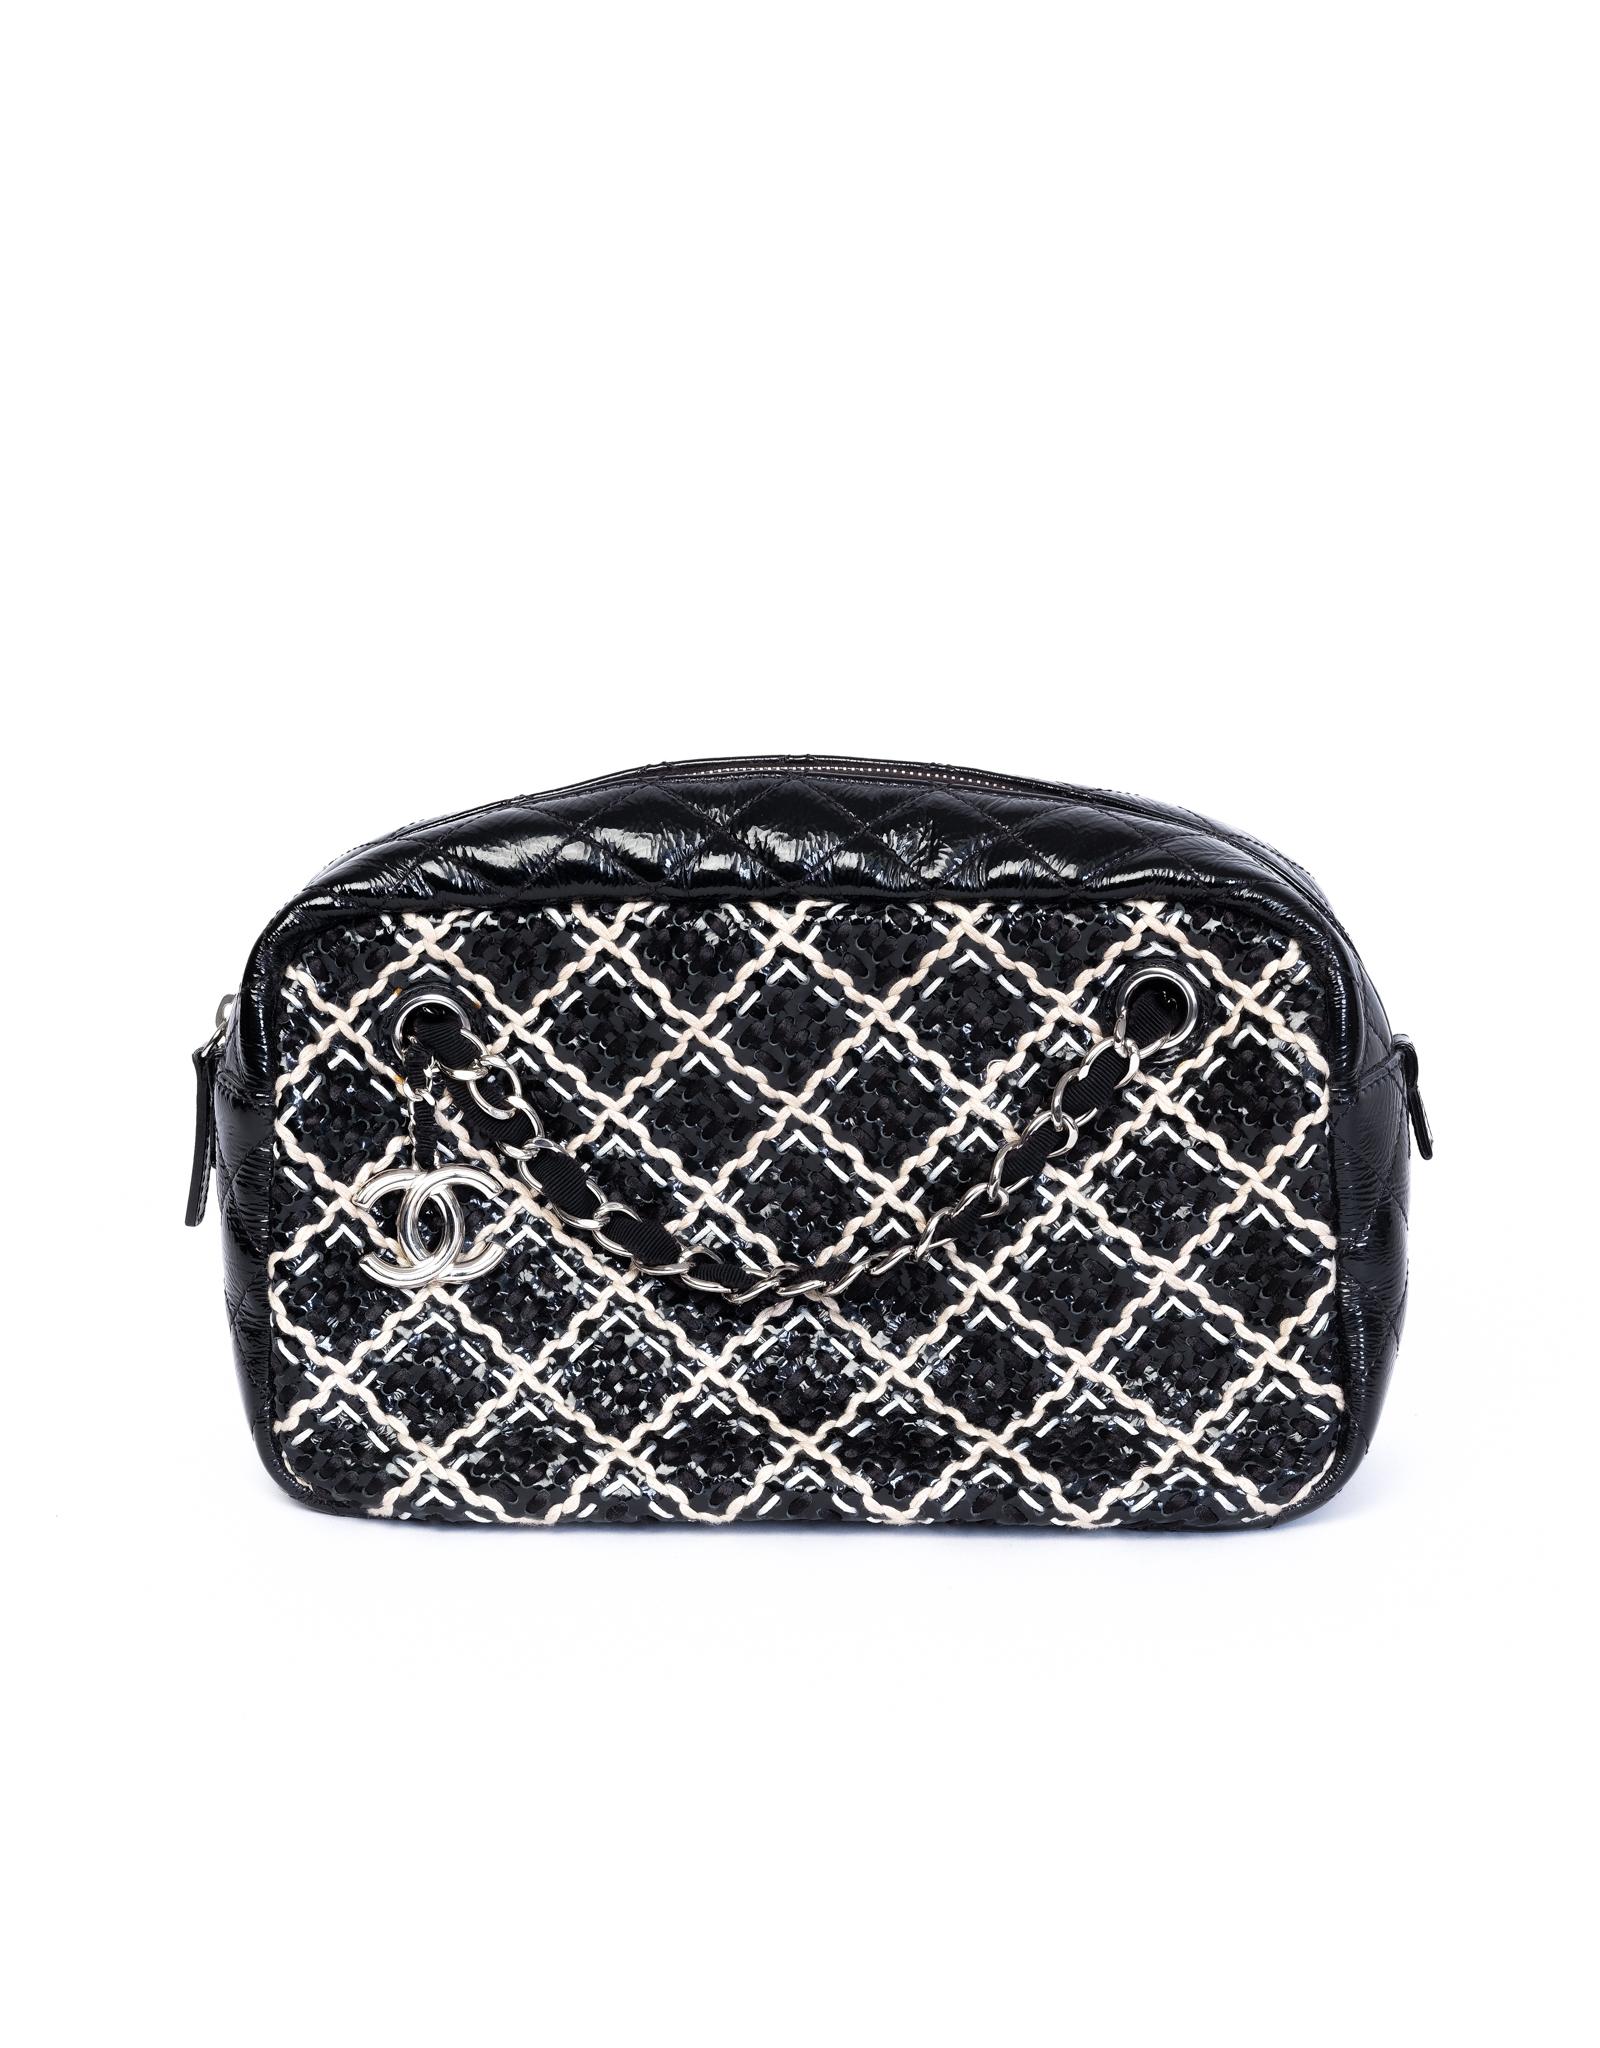 This vintage 2011 Chanel Camera Bag is constructed in woven fabric and patent leather with the signature diamond pattern stitch. Featuring a black and white cross diamond woven exterior, silver toned hardware with an interlocking CC logo pendant,